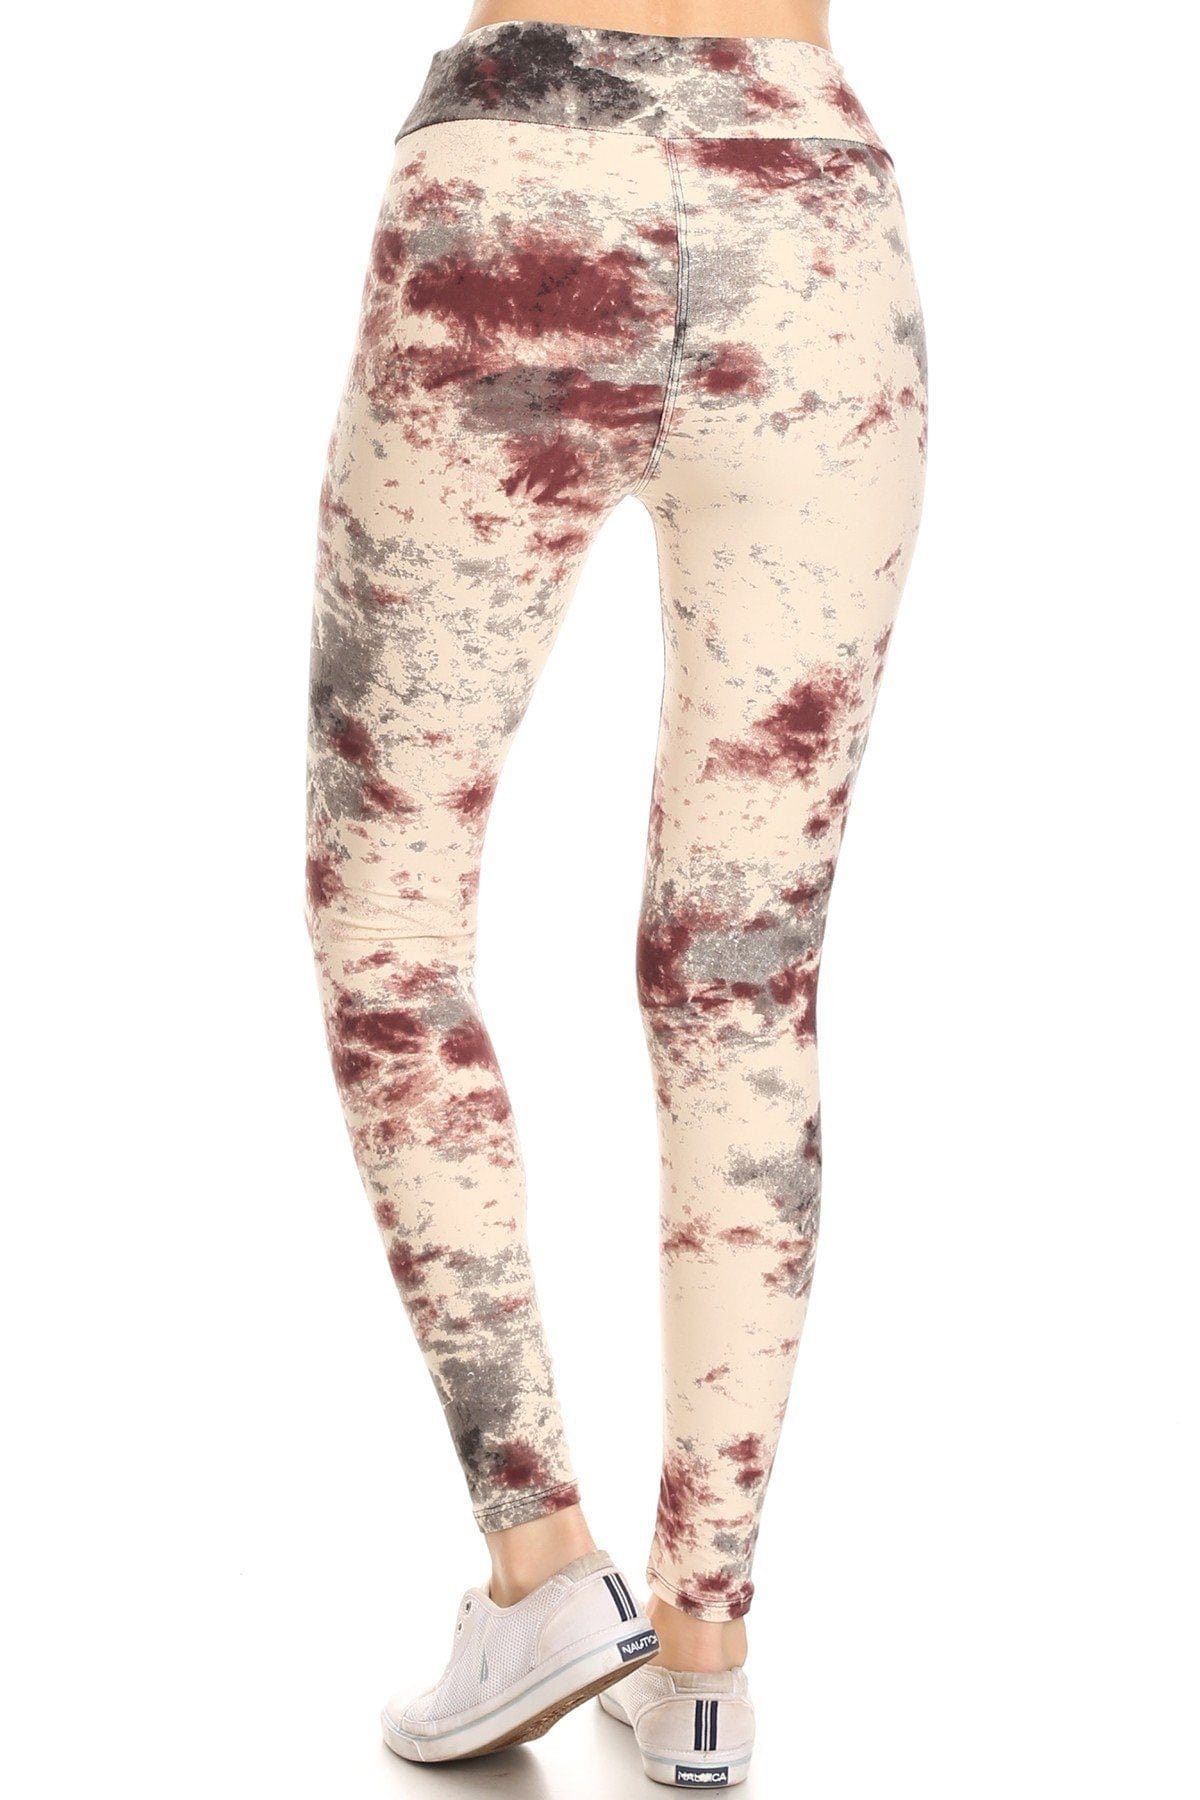 Yoga Style Banded Lined Tie Dye Print, Full Length Leggings In A Slim Fitting - Fashion Quality Boutik